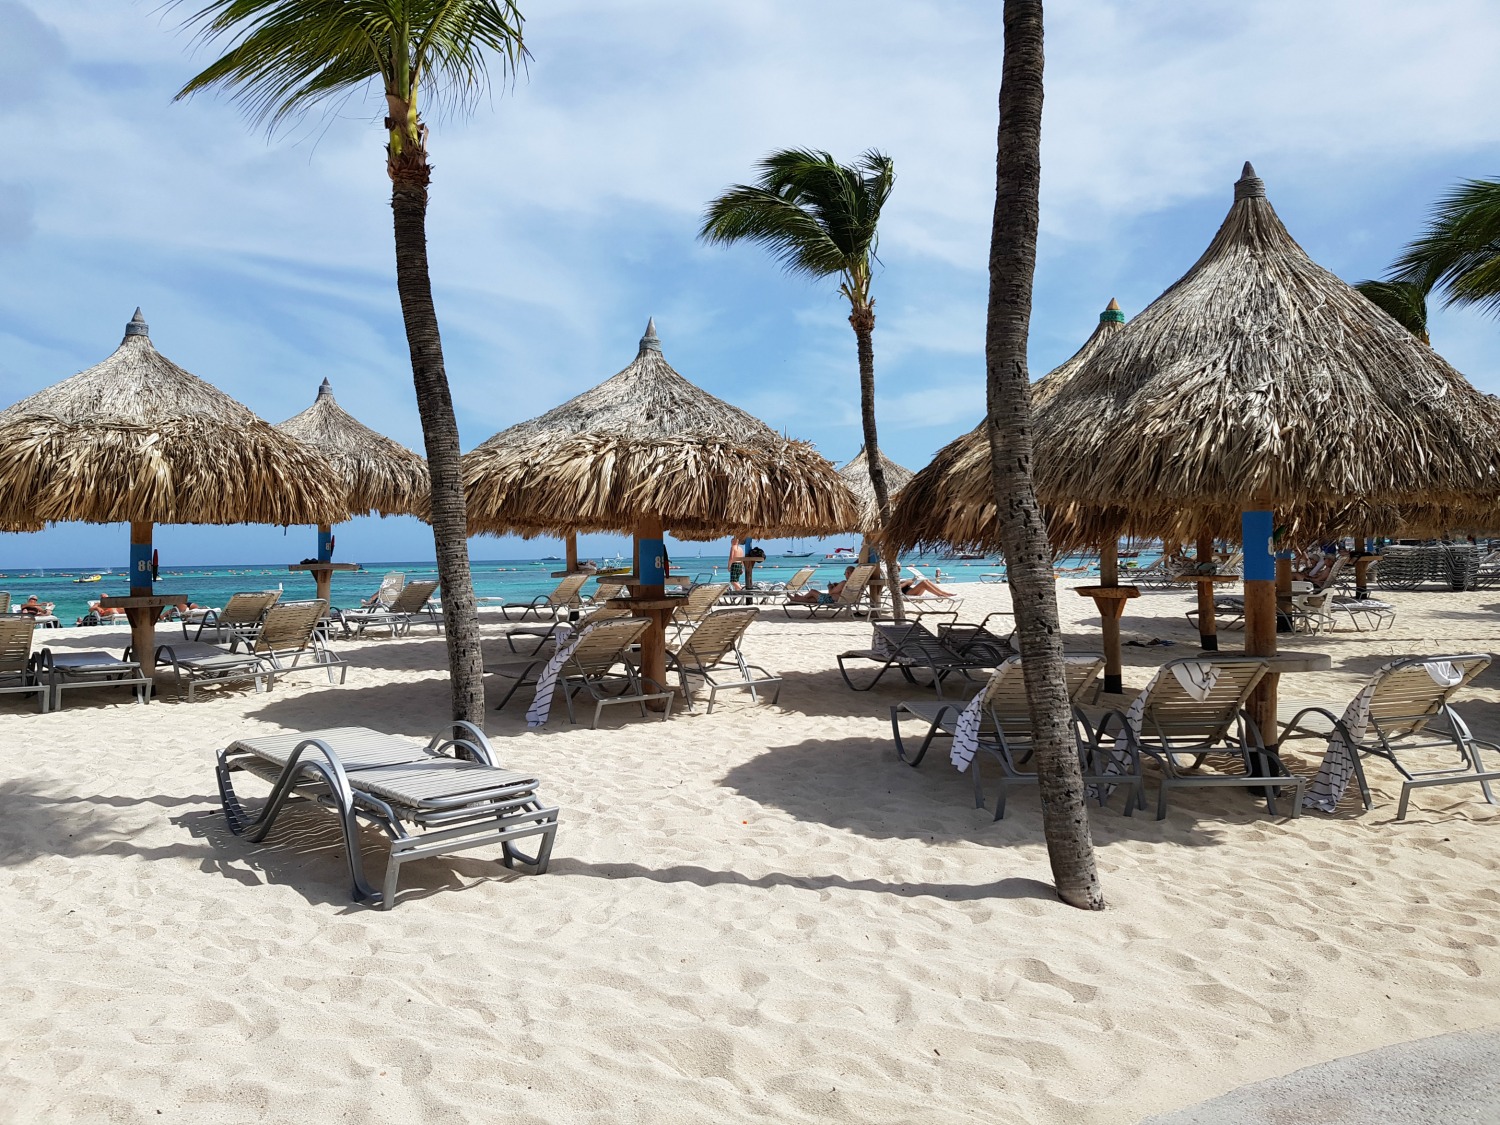 Palm umbrellas over loungers - the palapas reserved for guest of the Hilton Aruba on Palm Beach